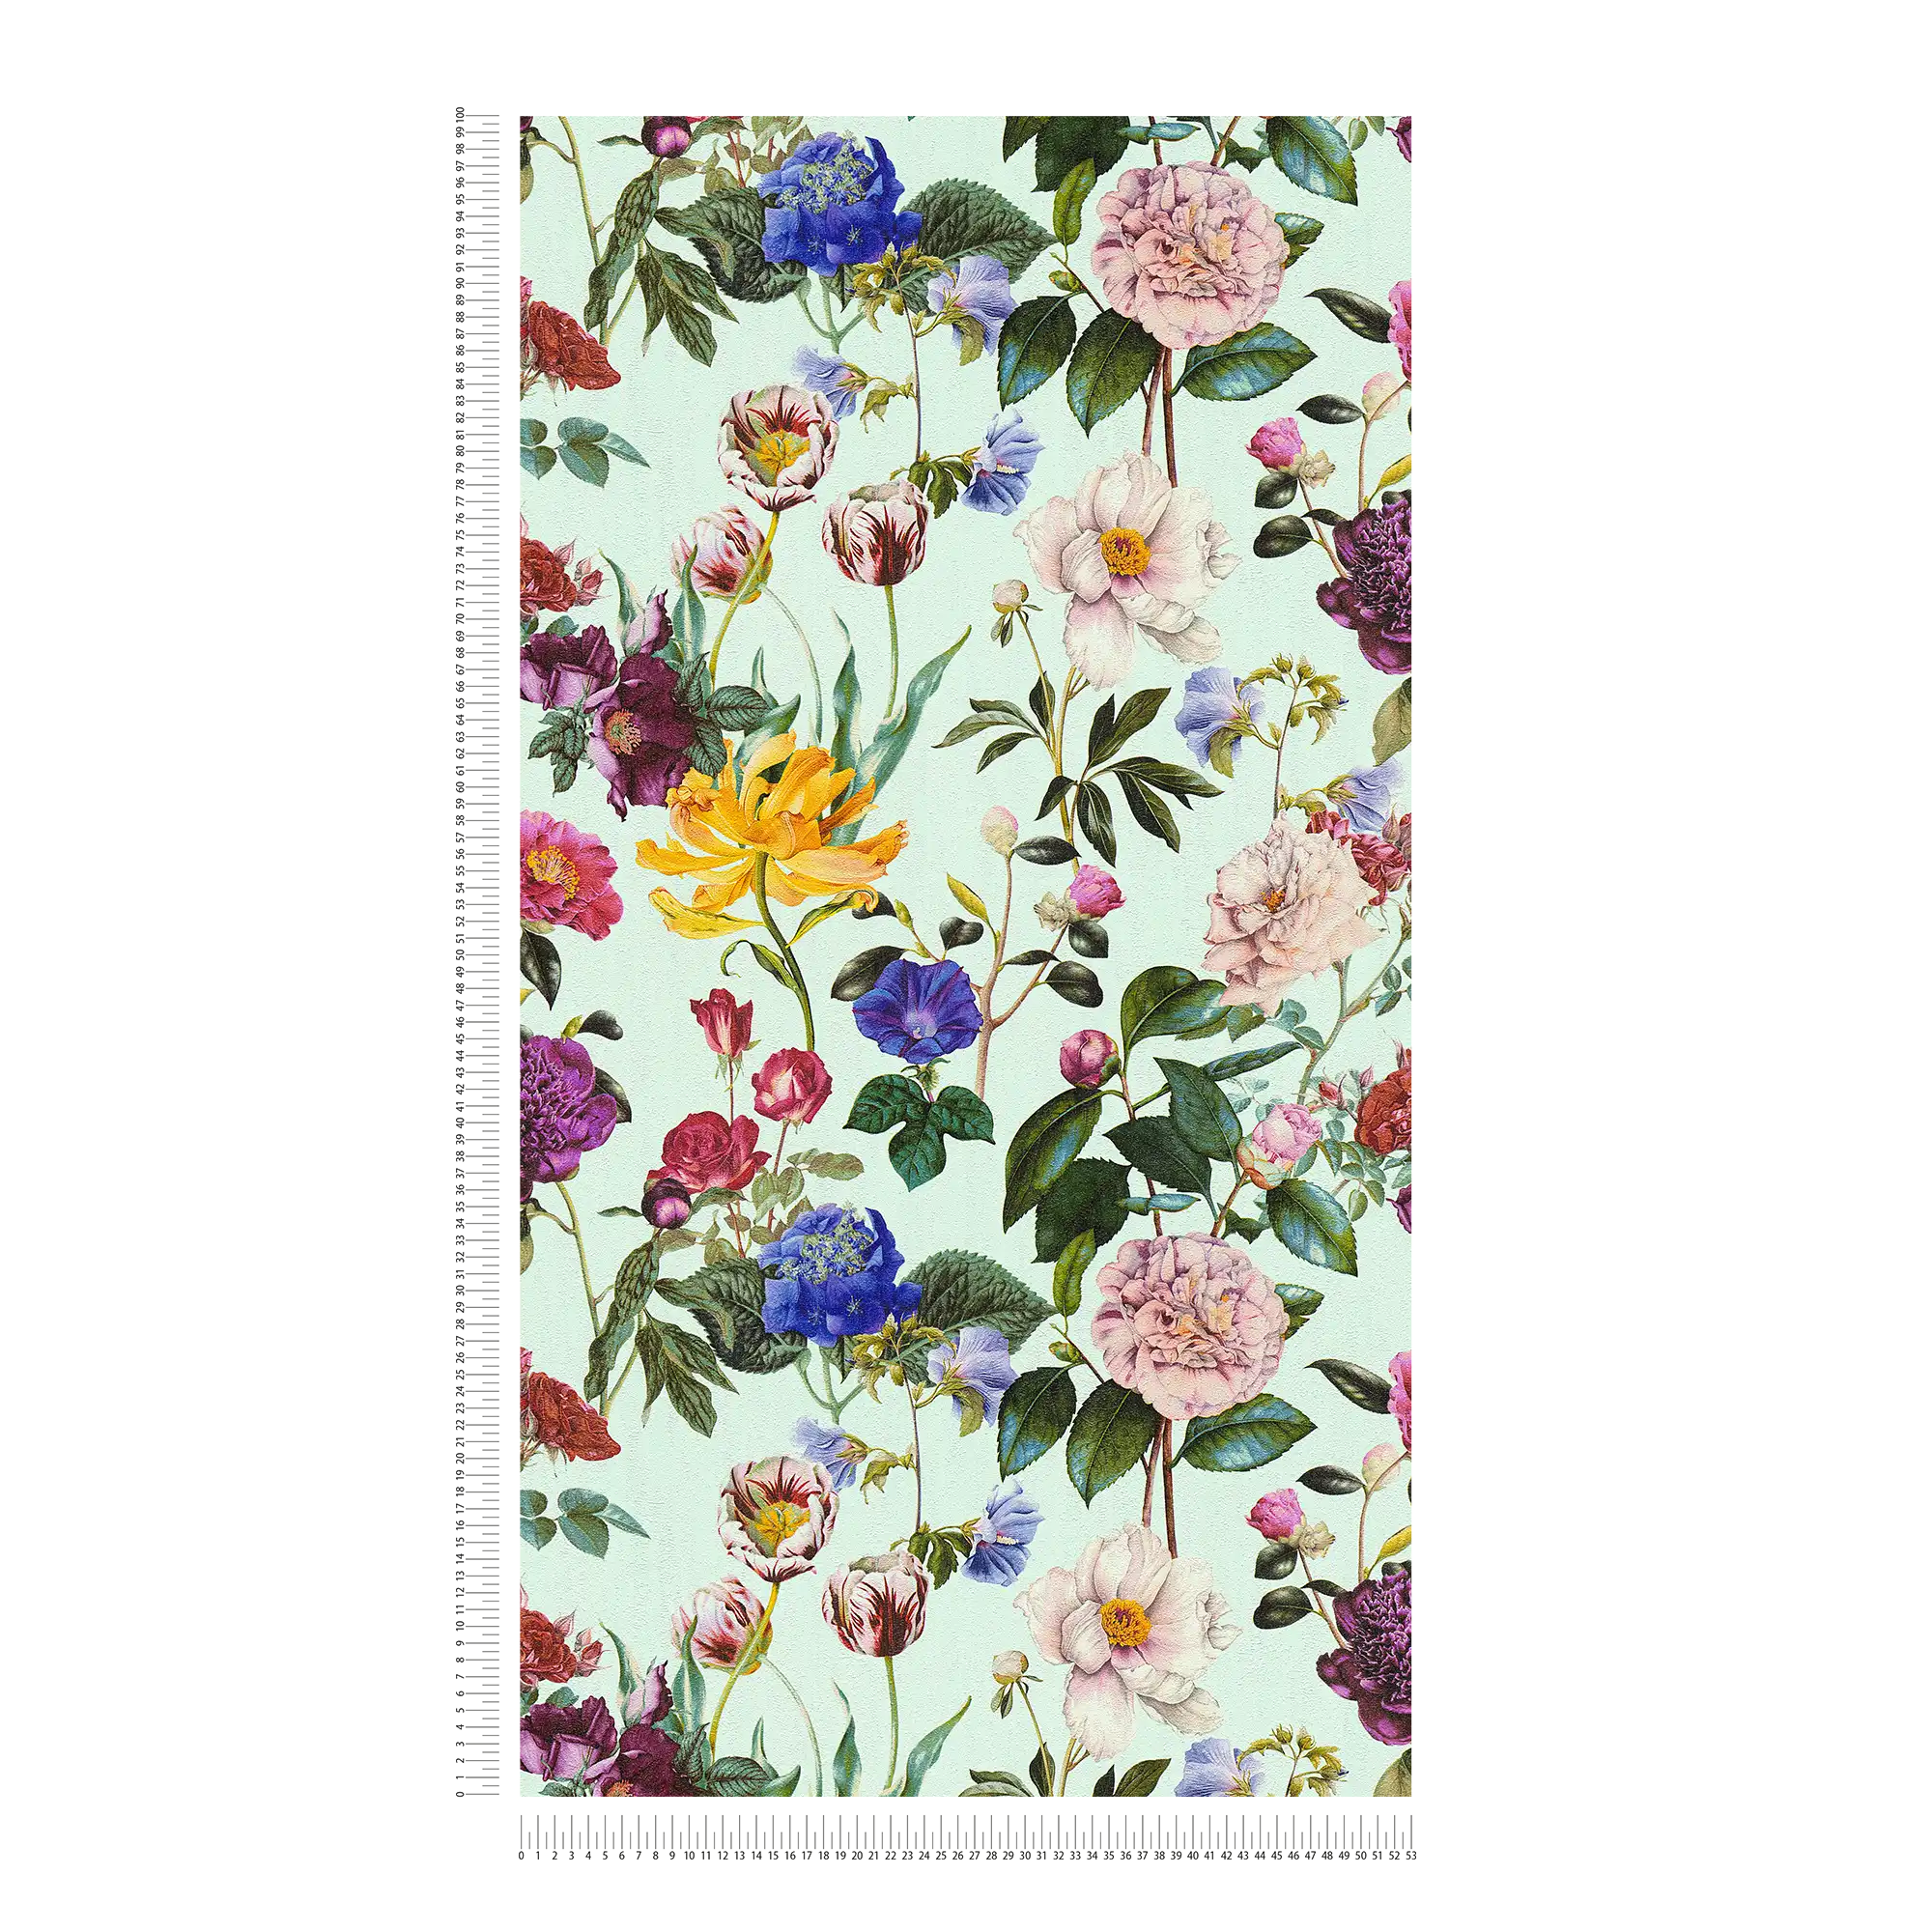             Blossoms wallpaper with flowers in bright colours - blue, green, red
        